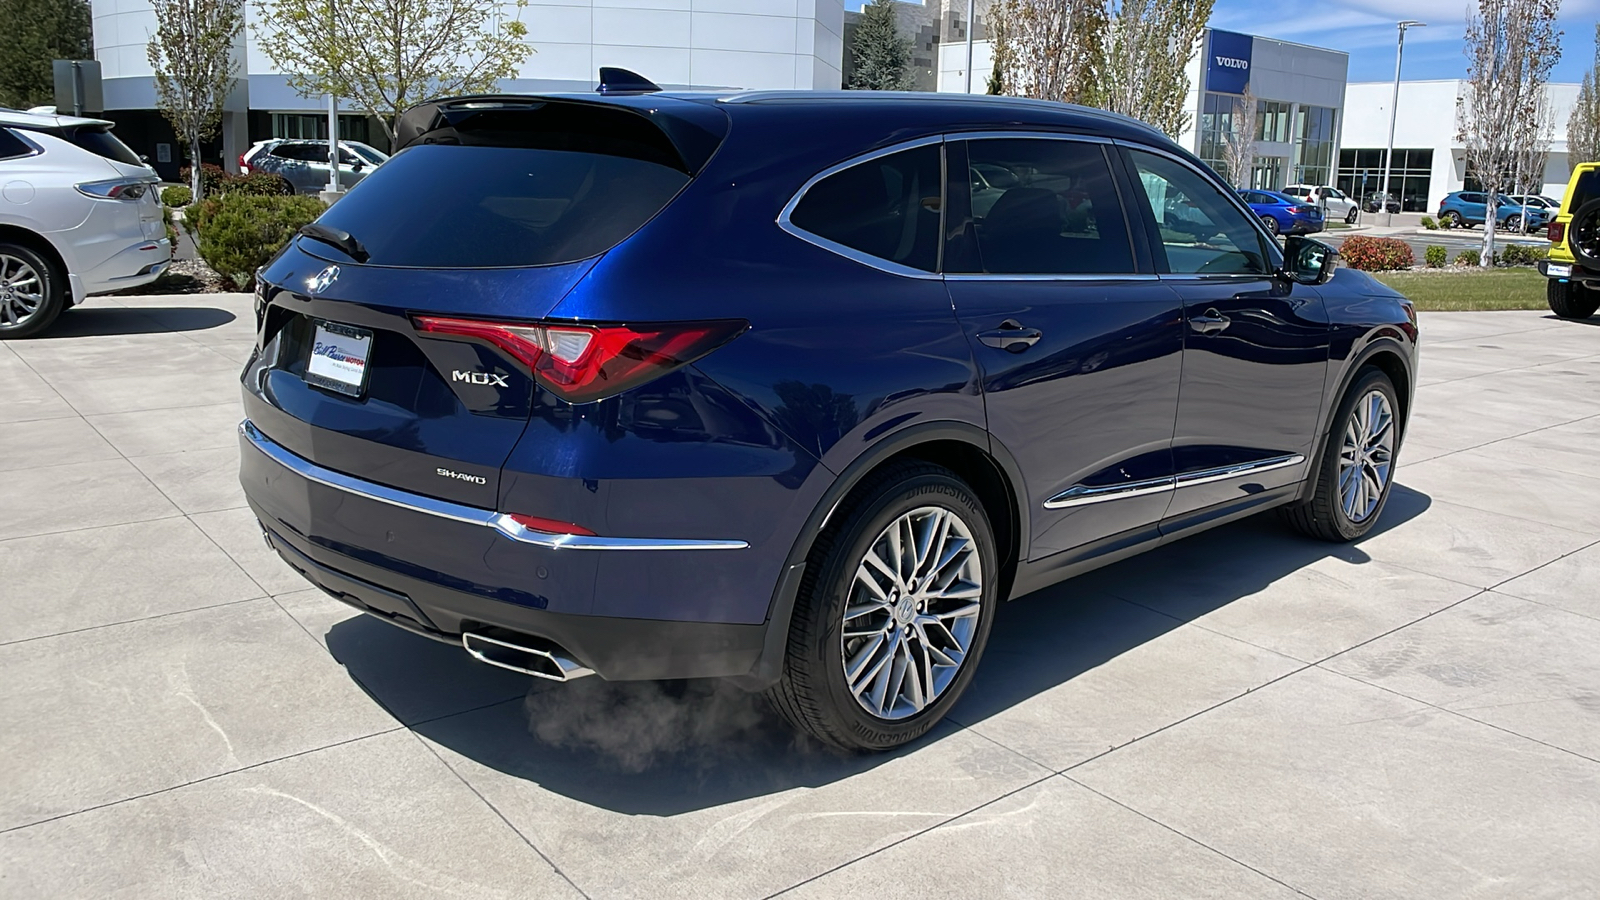 2022 Acura MDX w/Advance Package 4